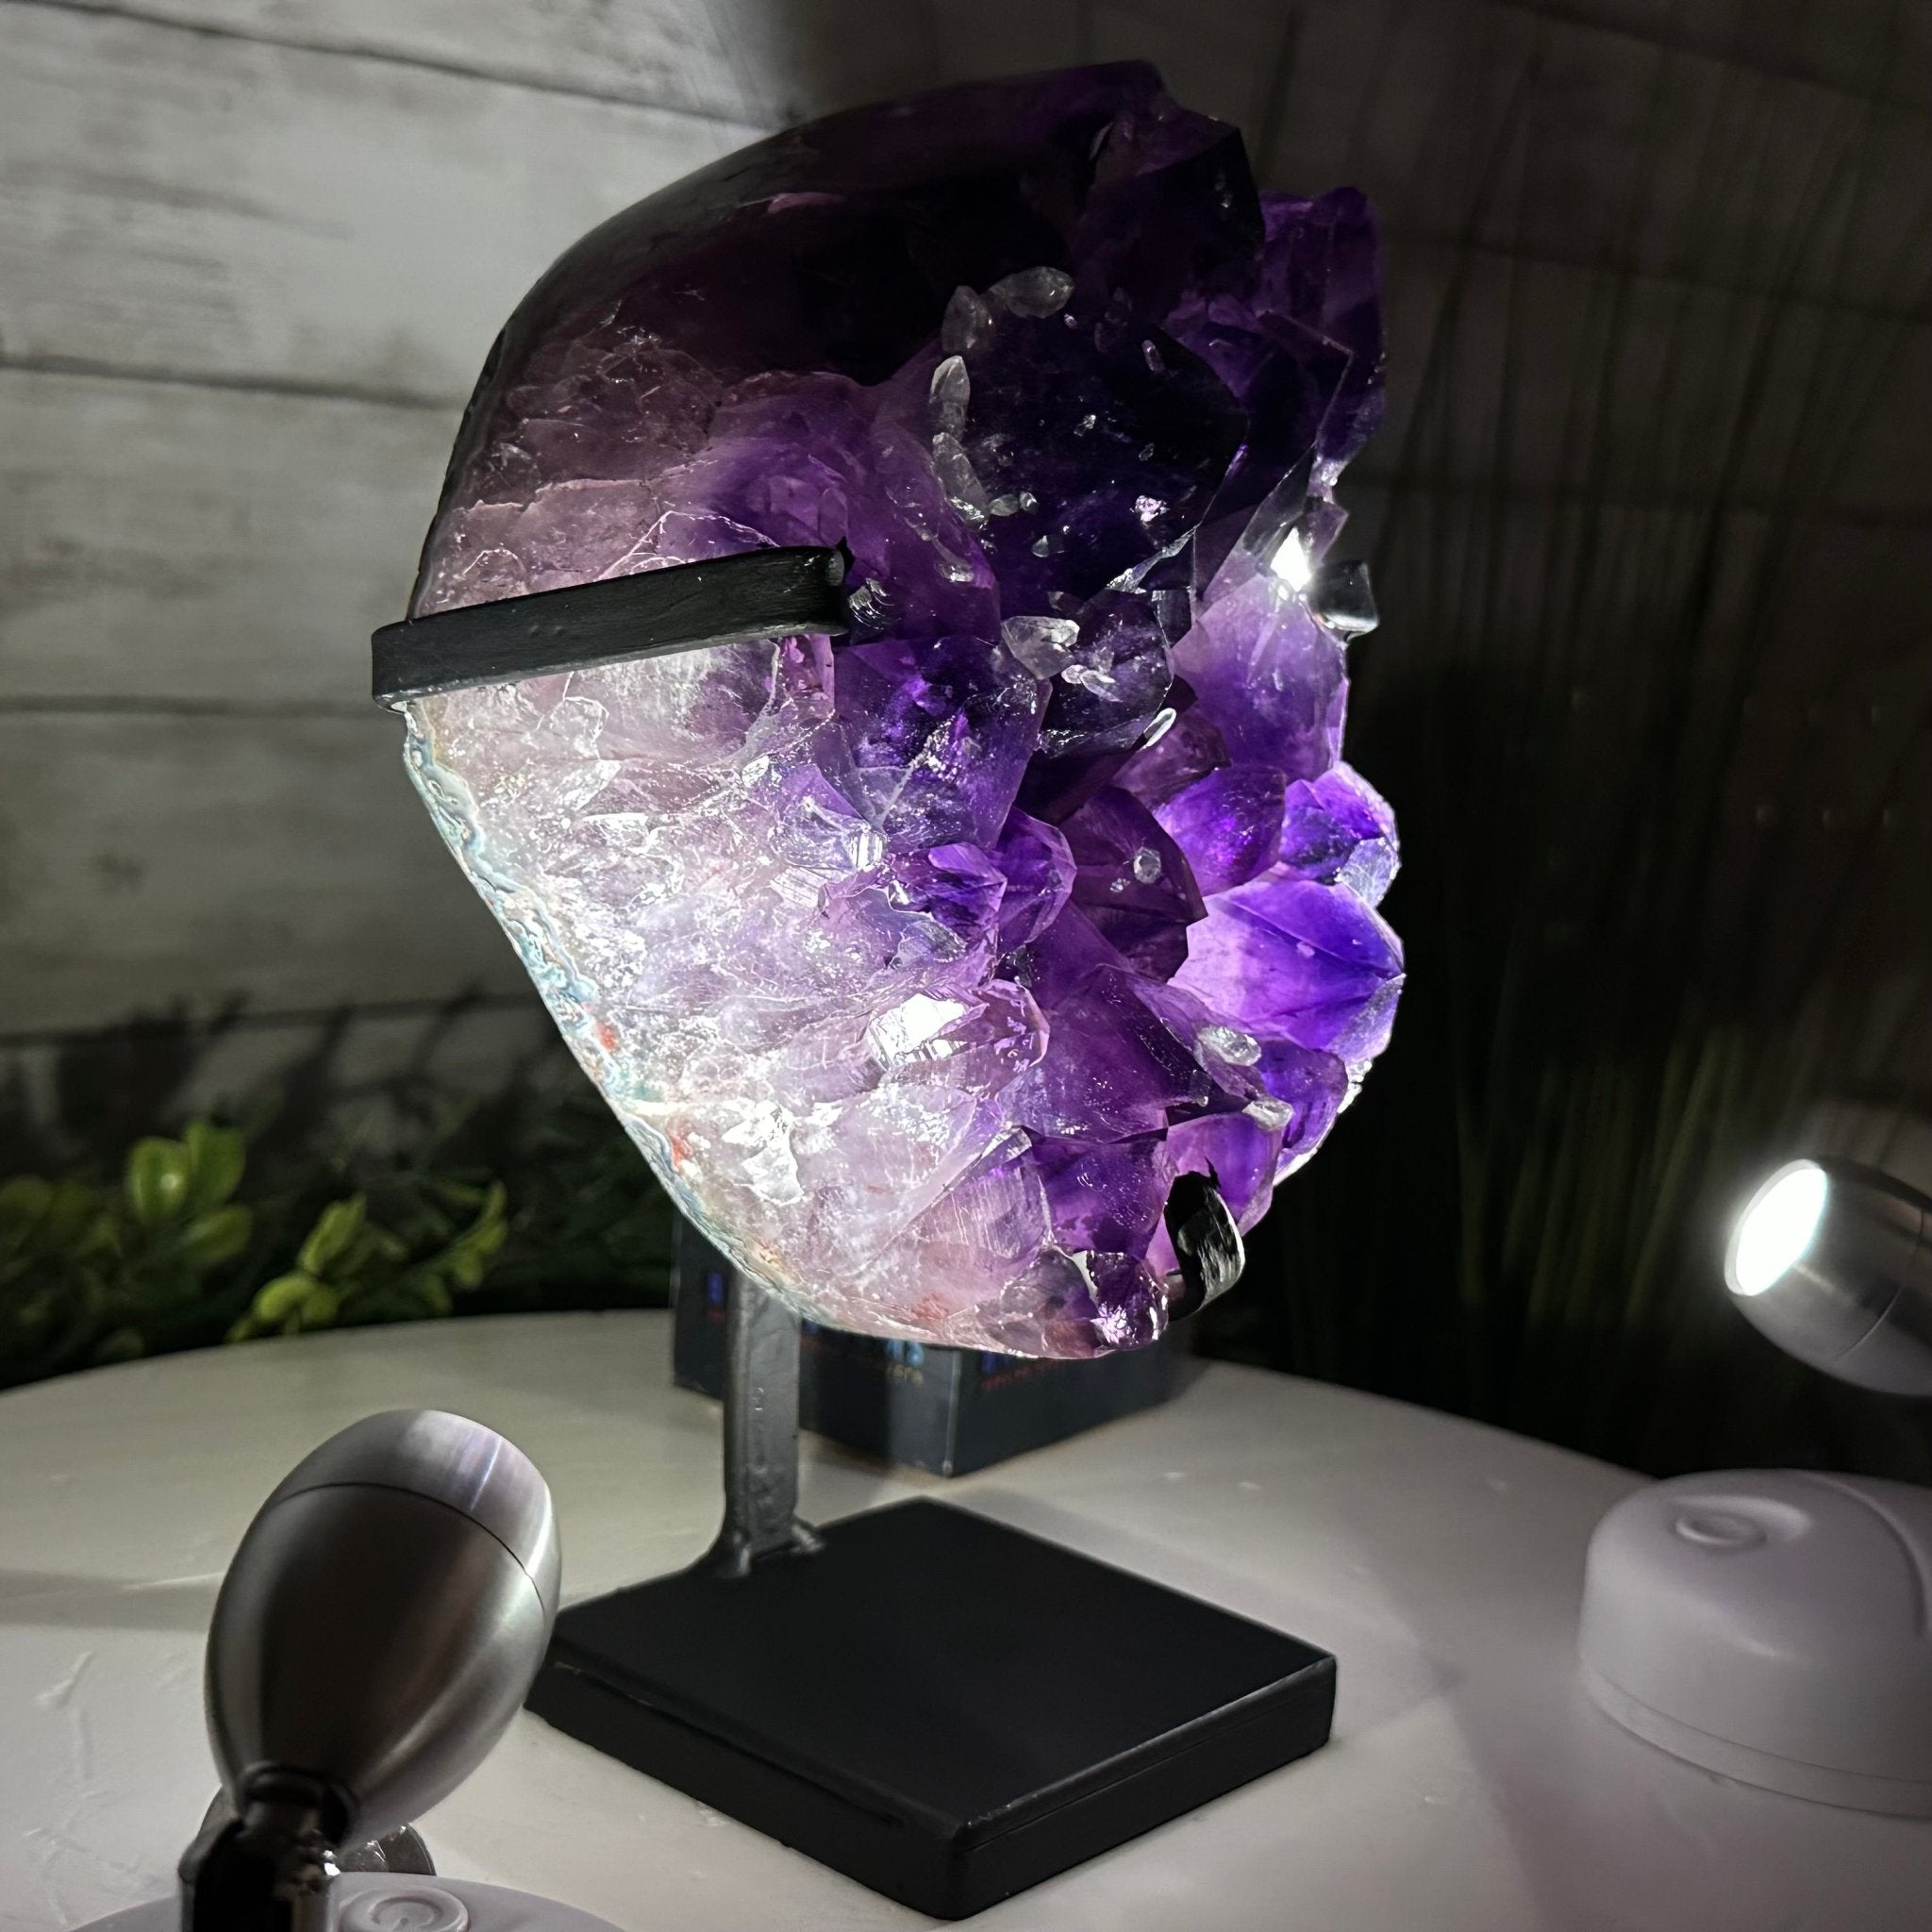 Super Quality Amethyst Cluster on a Metal Stand, 5.7 lbs & 8.5" Tall #5491-0154 - Brazil GemsBrazil GemsSuper Quality Amethyst Cluster on a Metal Stand, 5.7 lbs & 8.5" Tall #5491-0154Clusters on Fixed Bases5491-0154